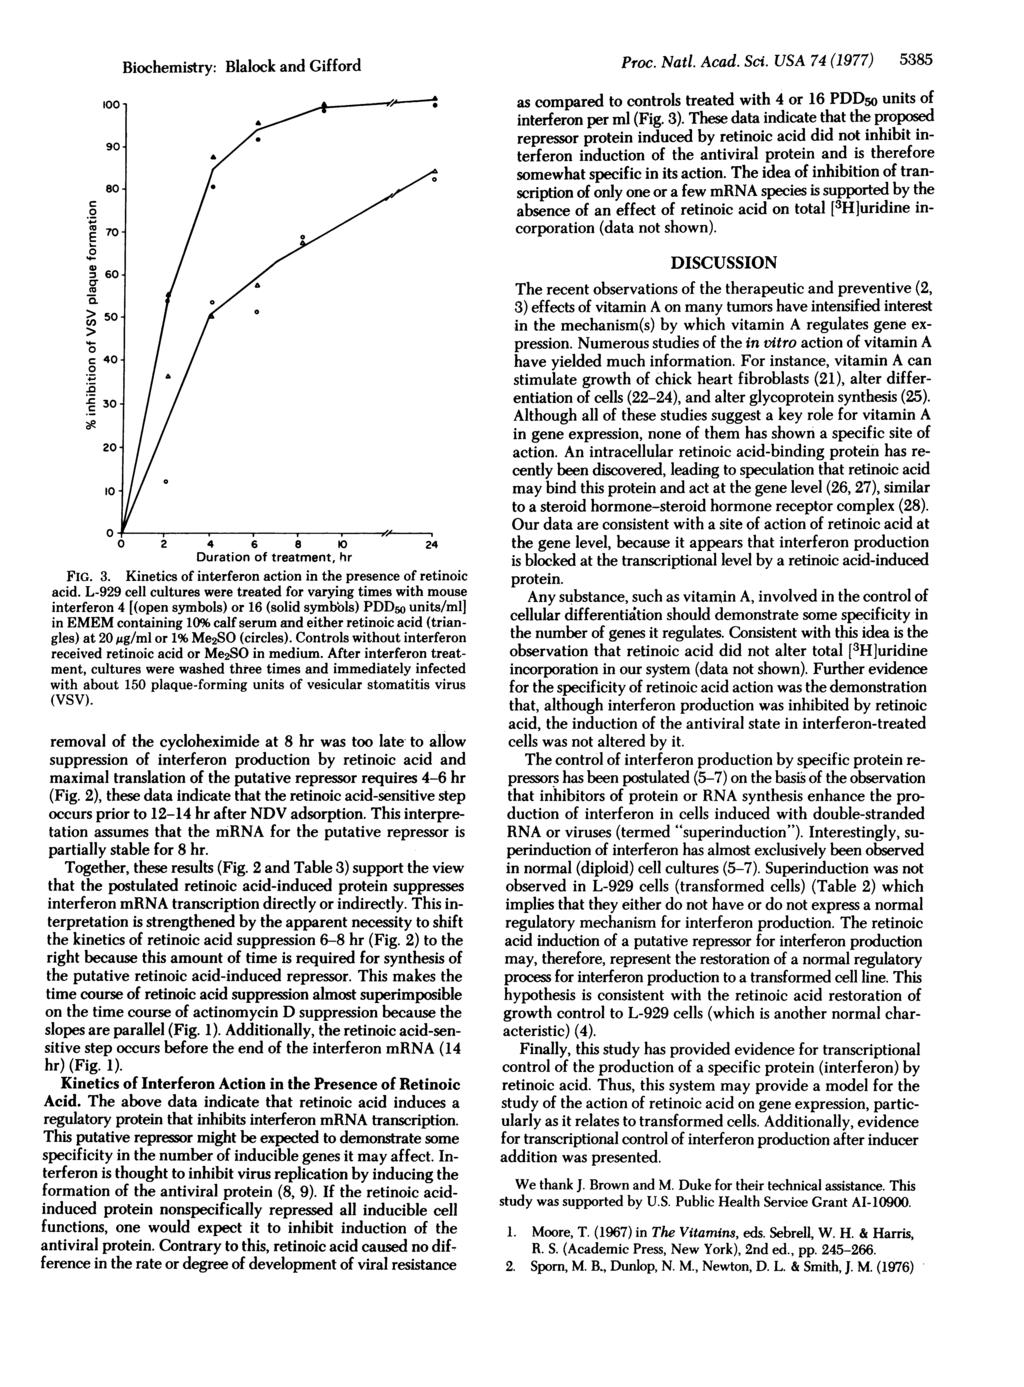 C 9 1-8- E E 7-6- ~ > 5- c 4-._ C 3-._ Biochemistry: Blalock and Gifford 4 6 8 1 24 Duration of treatment, hr FIG. 3. Kinetics of interferon action in the presence of retinoic acid.